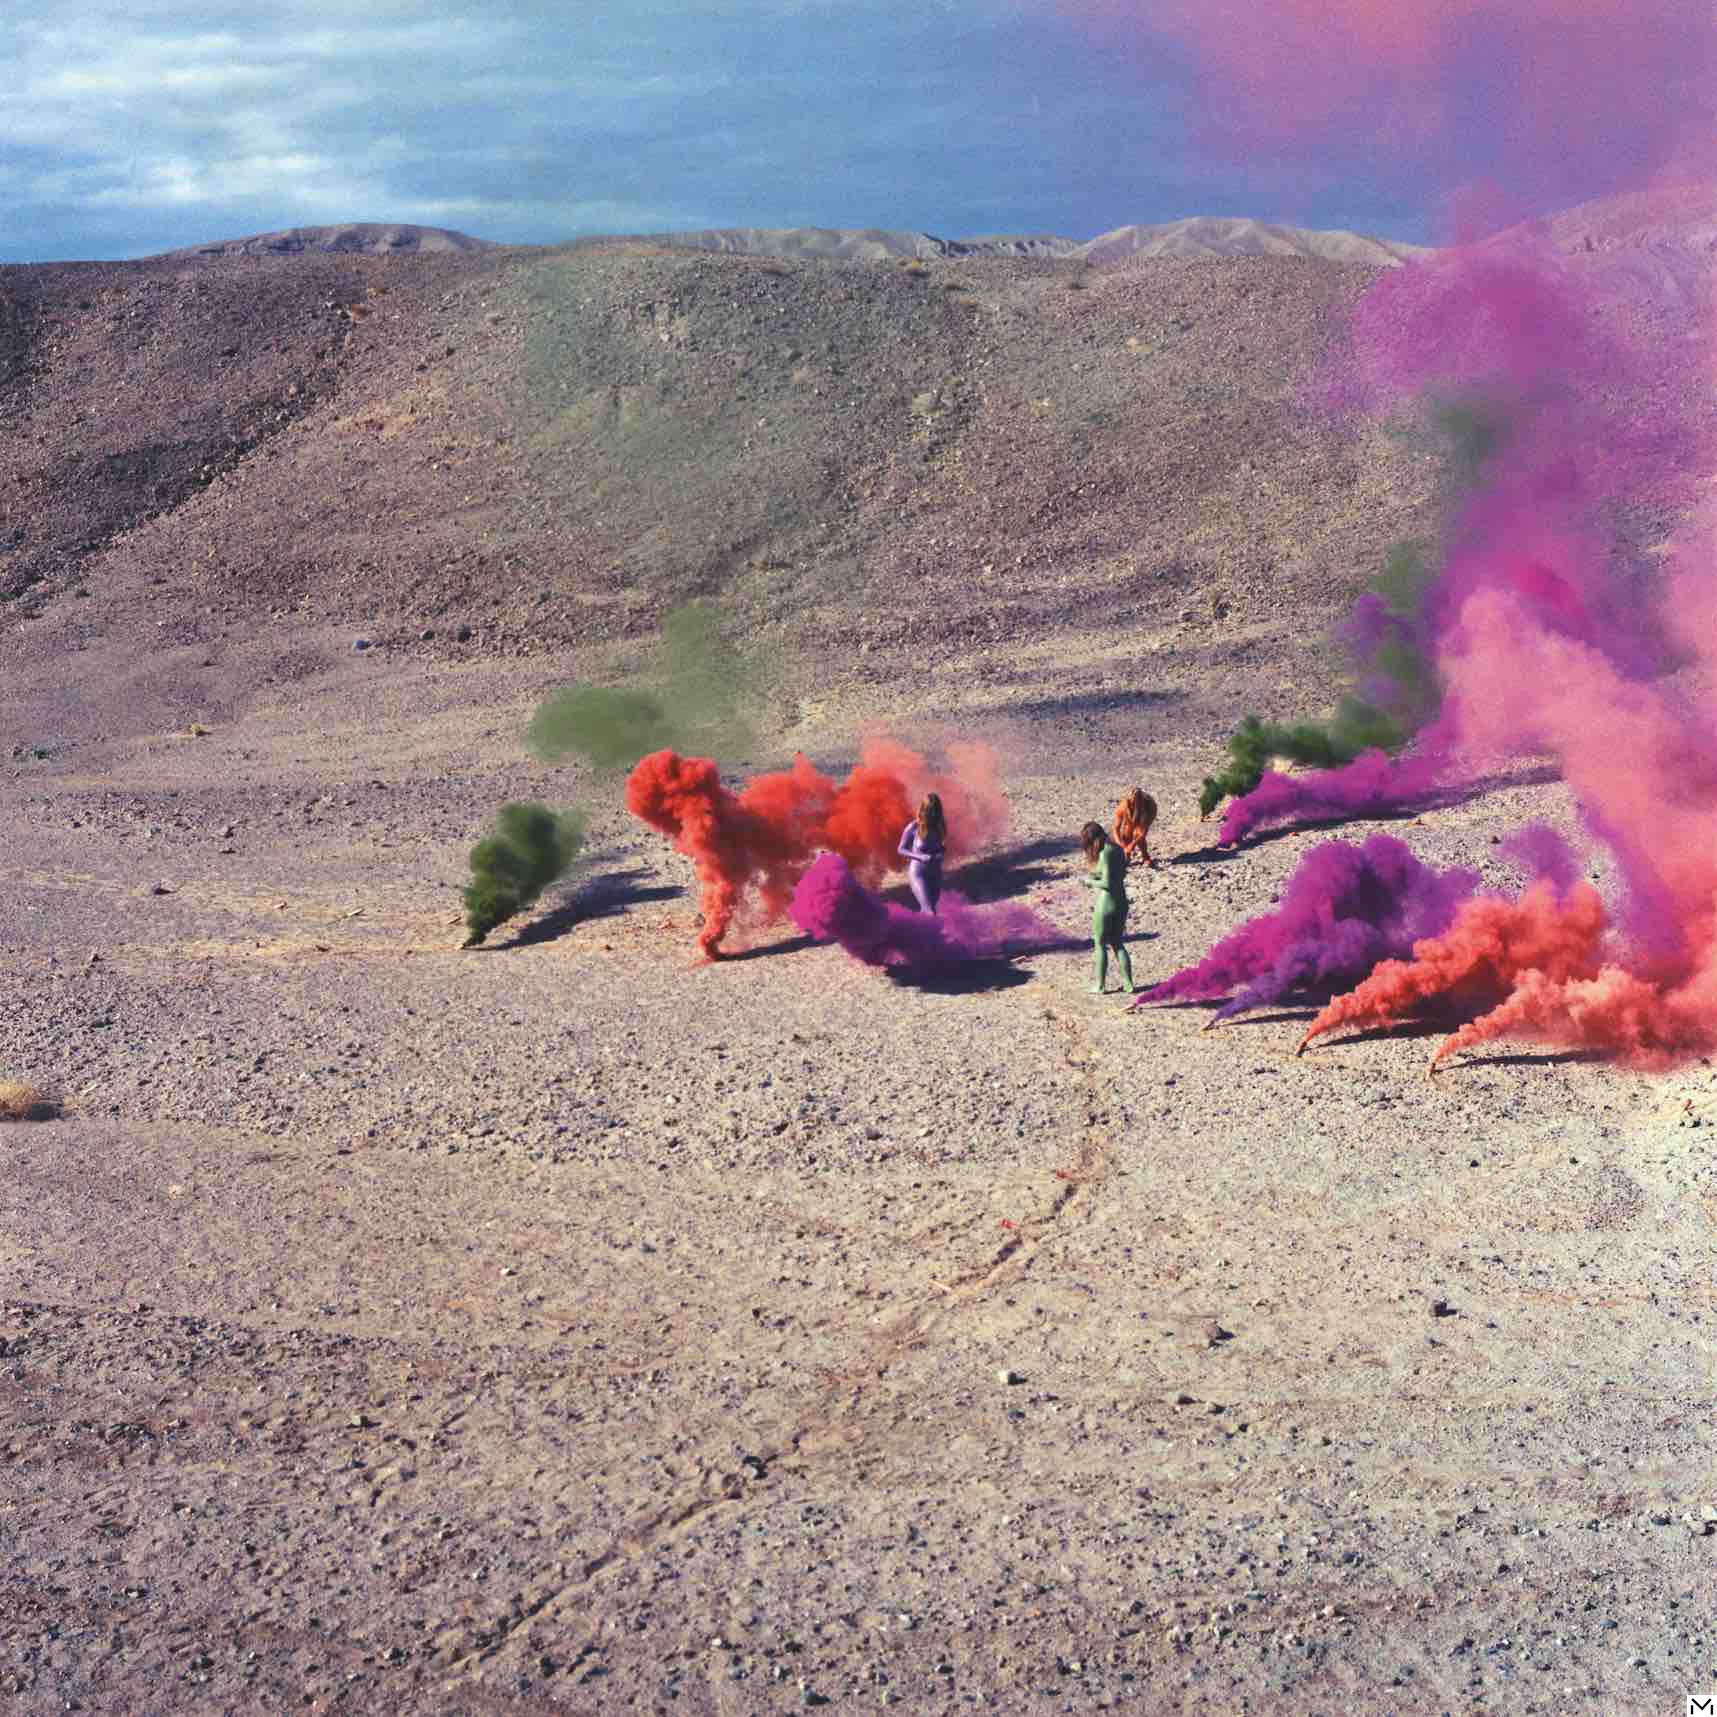 Judy Chicago, 'Smoke bodies' from 'Women in smoke' 1972/2018, courtesy of Through the Flowers Archives, The Center for Art&Environment at the Nevada Museum of Art © Judy Chicago © ADAGP, Paris 2021